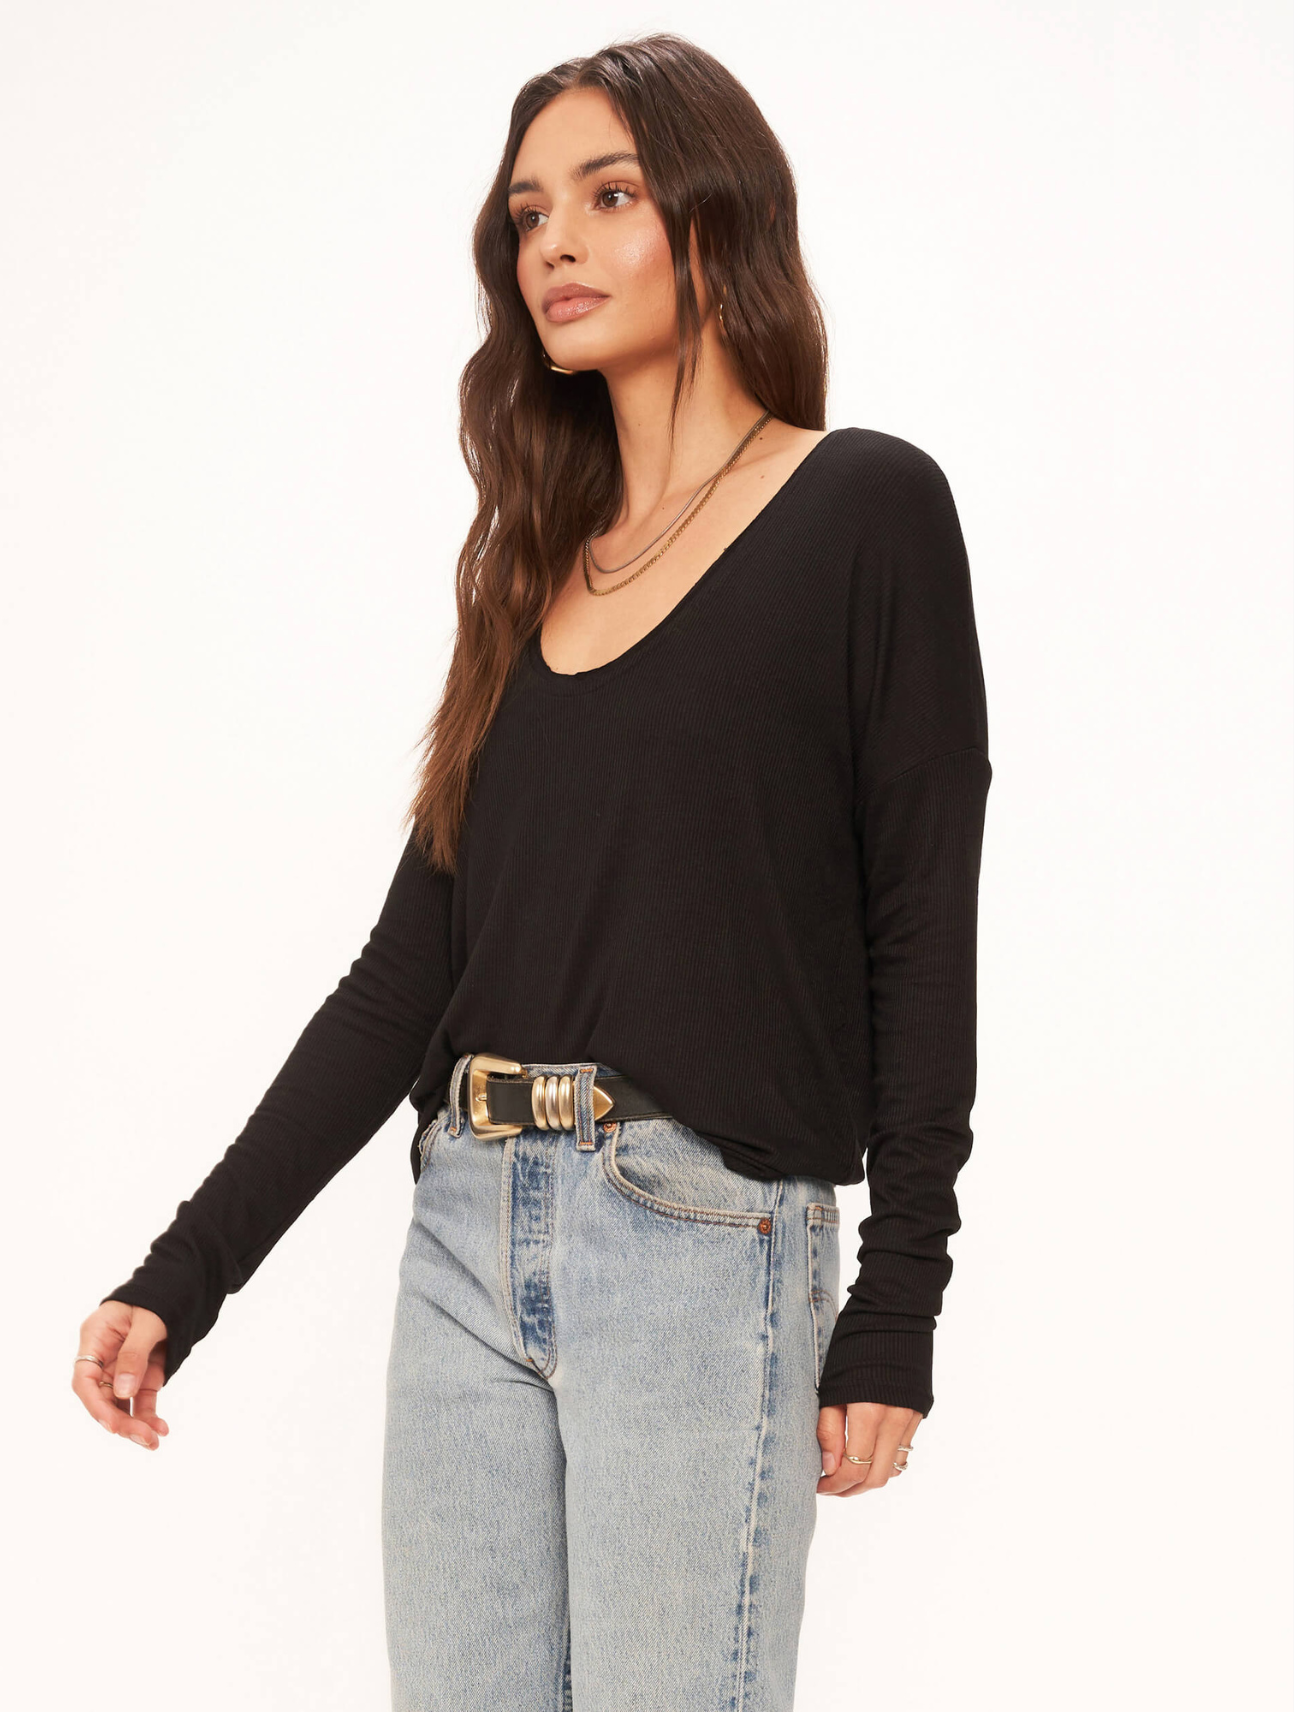 Charlotte Relaxed Long Sleeve